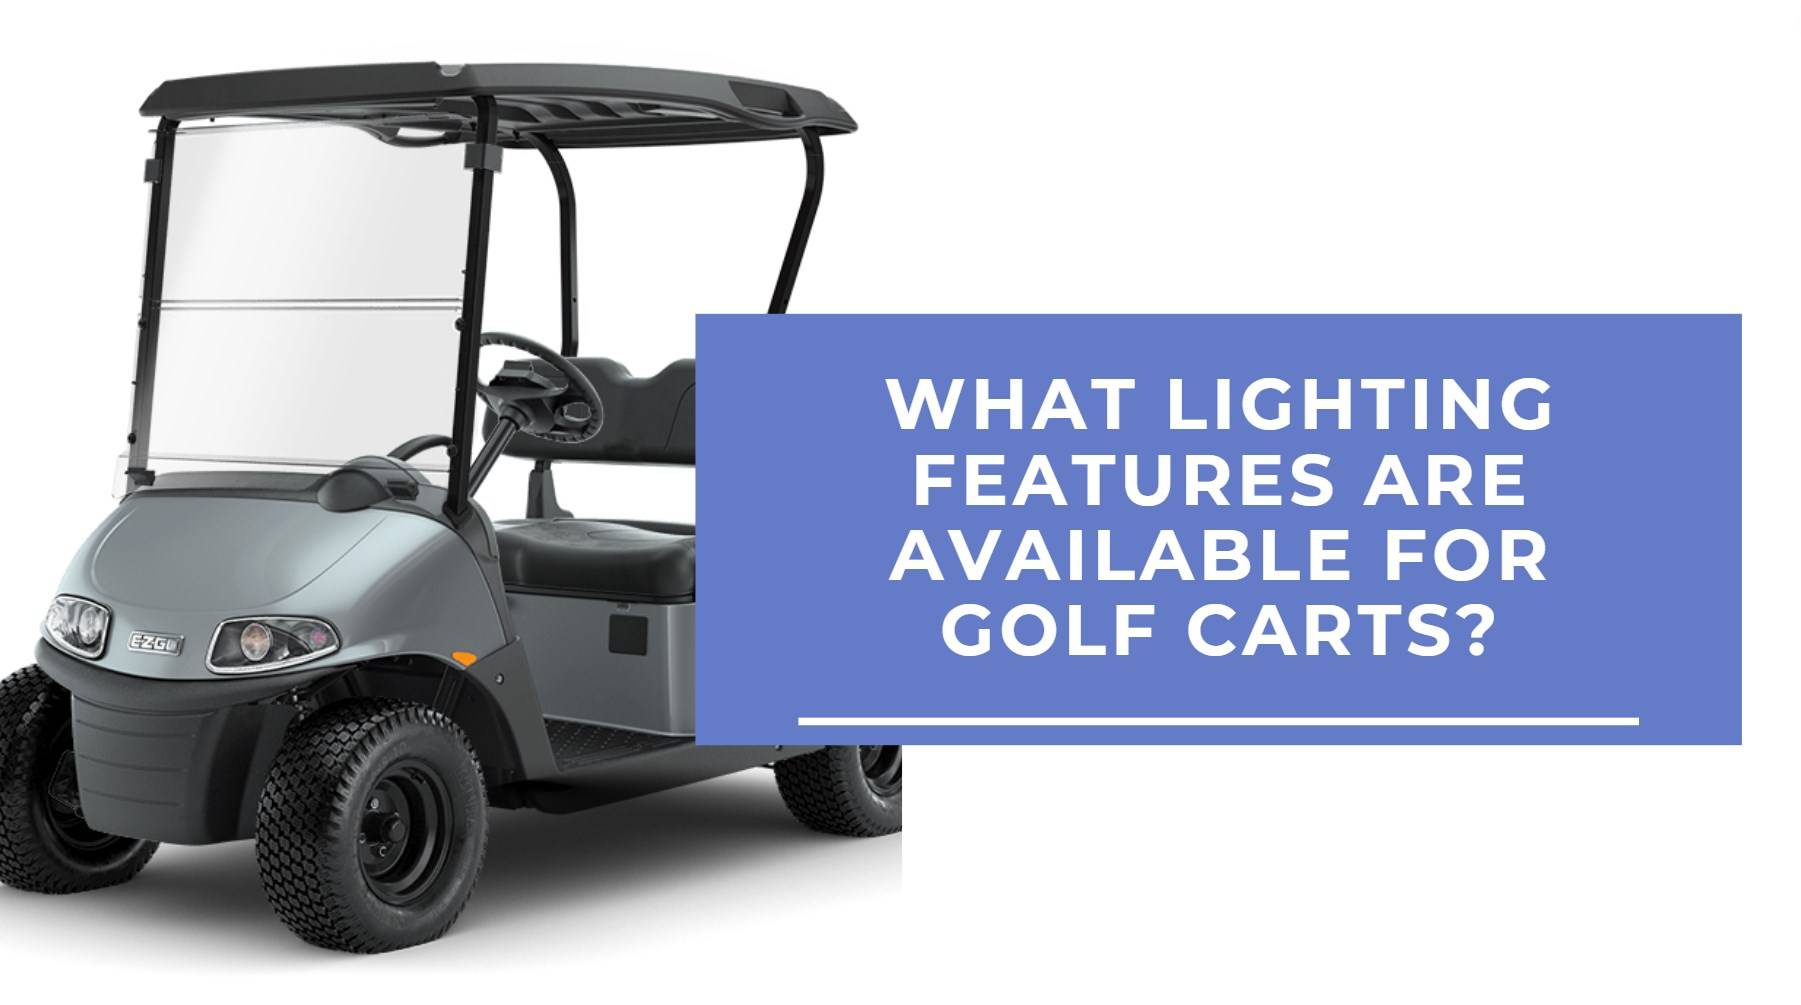 What lighting features are available for golf carts? Safety Features of Golf Carts?